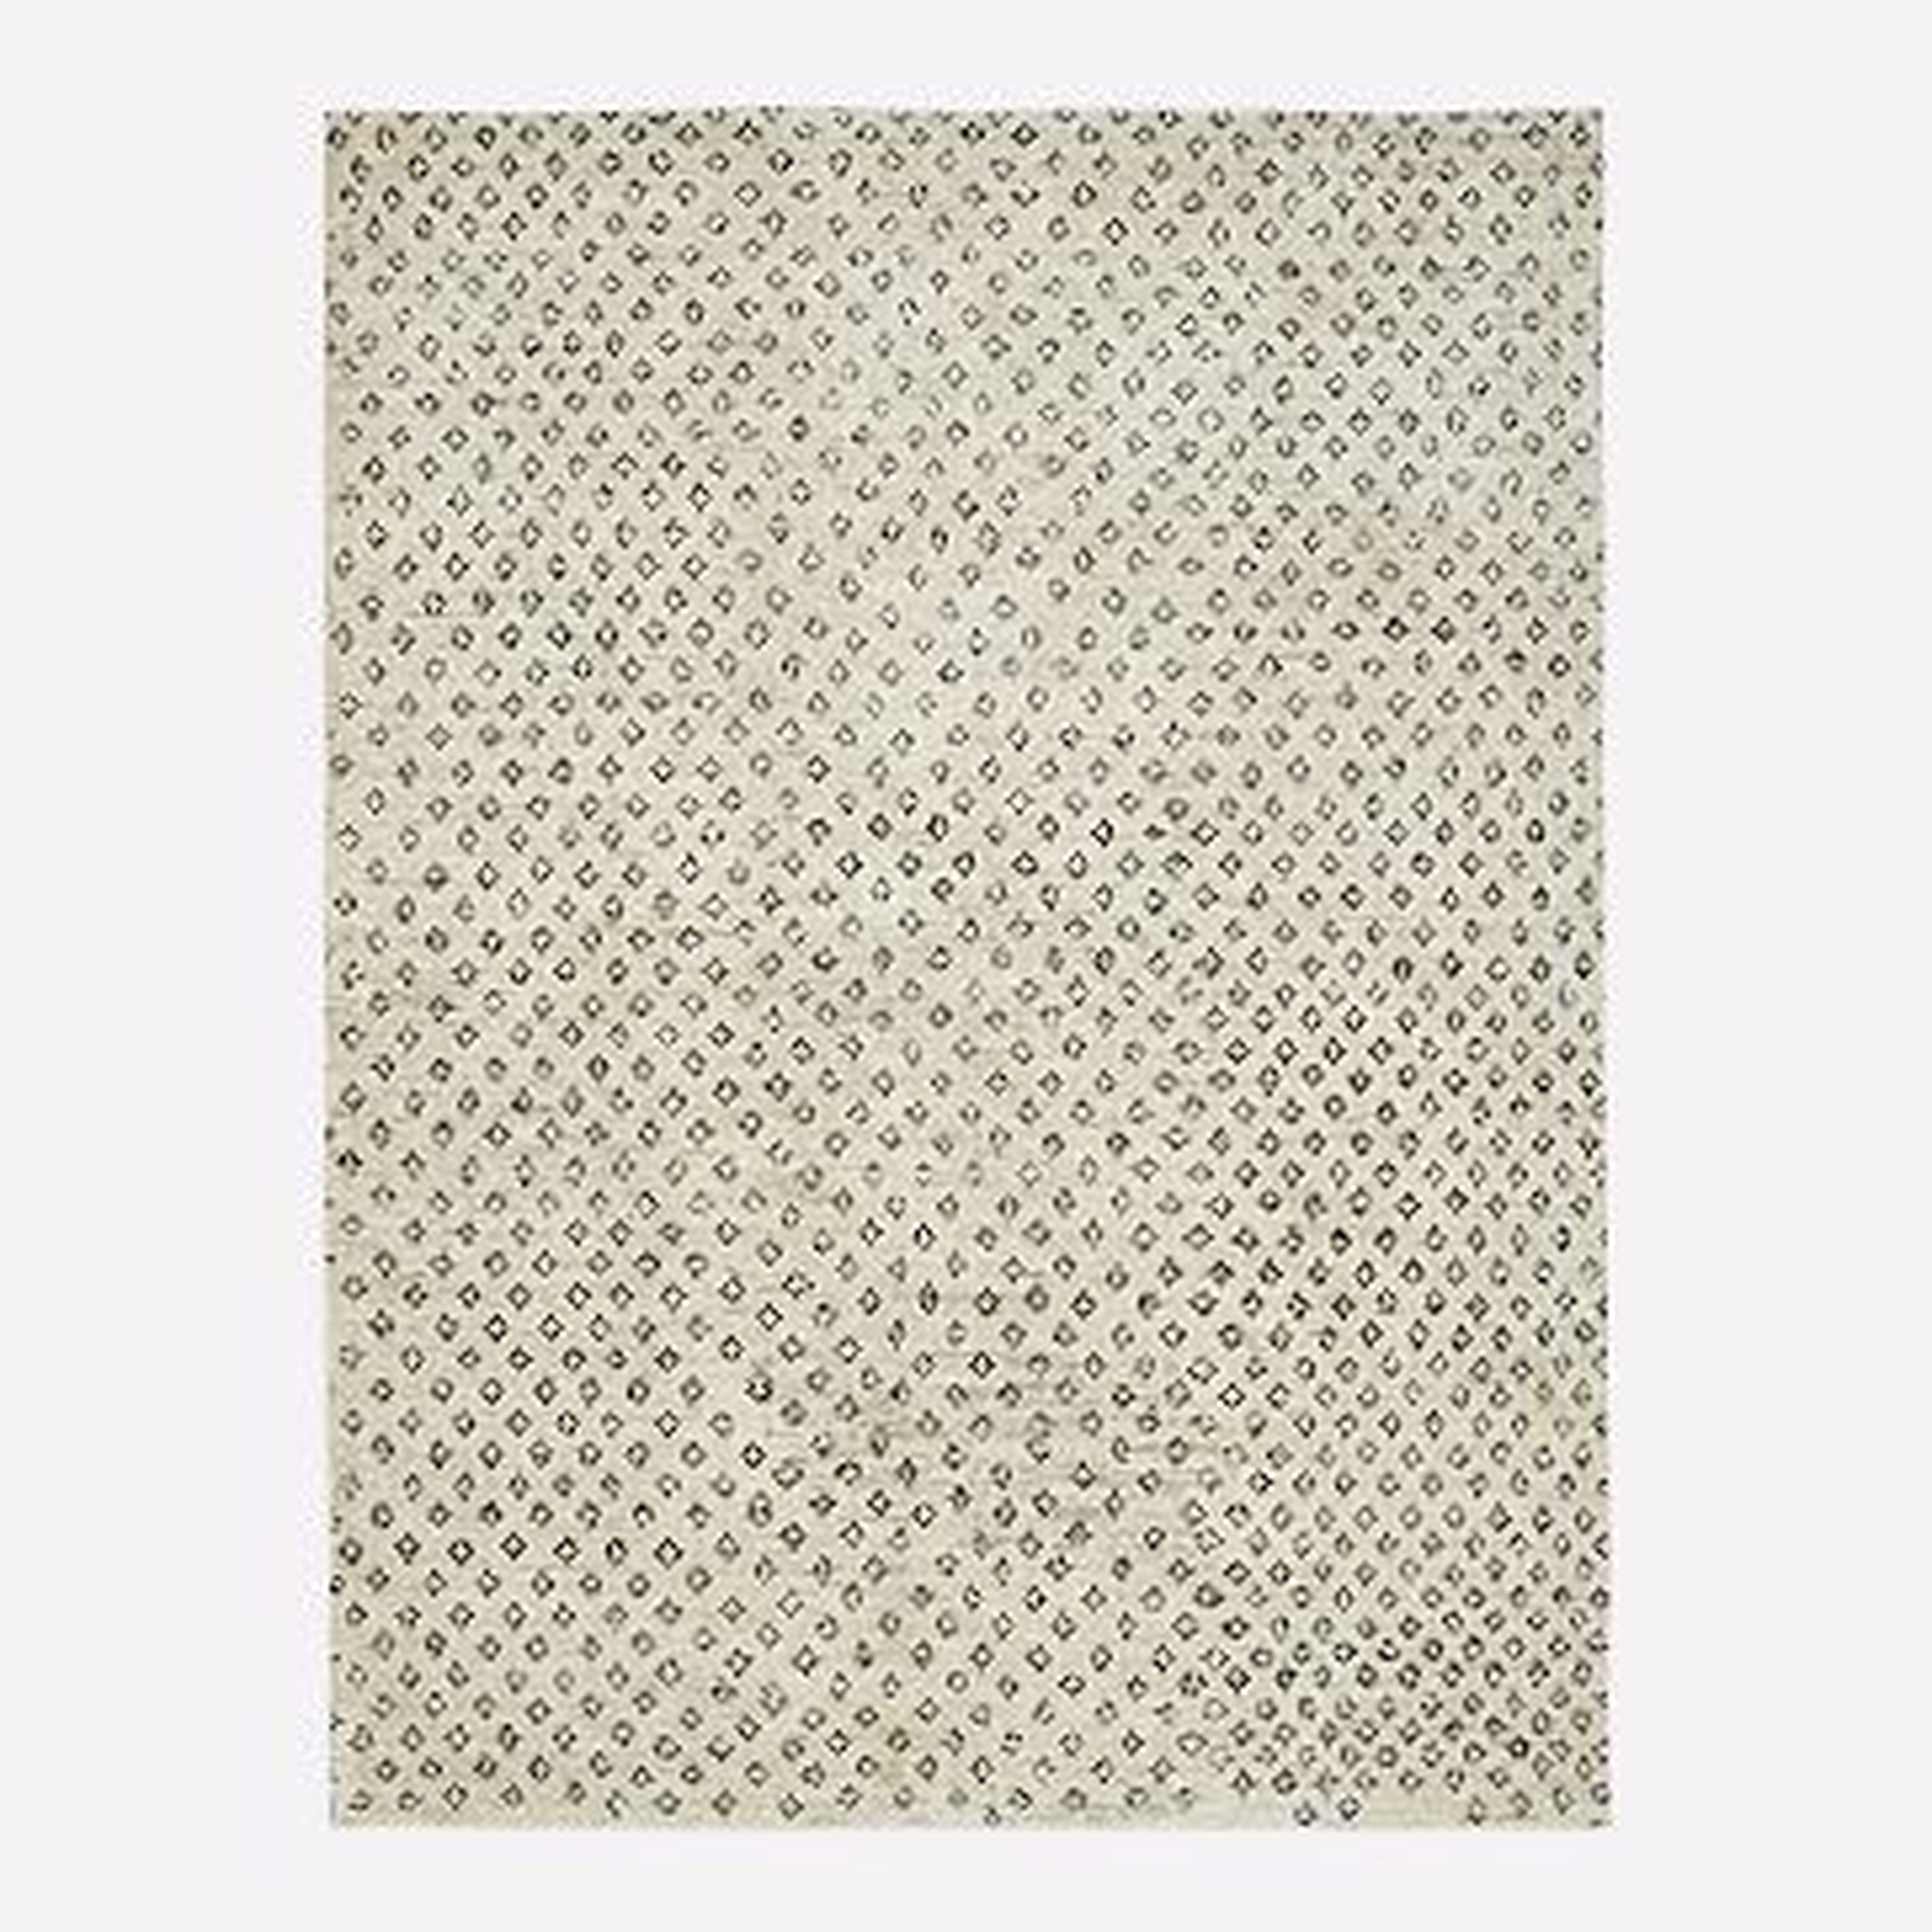 Hand Knotted Jute Diamonds Rug, 8'x10', Natural - West Elm